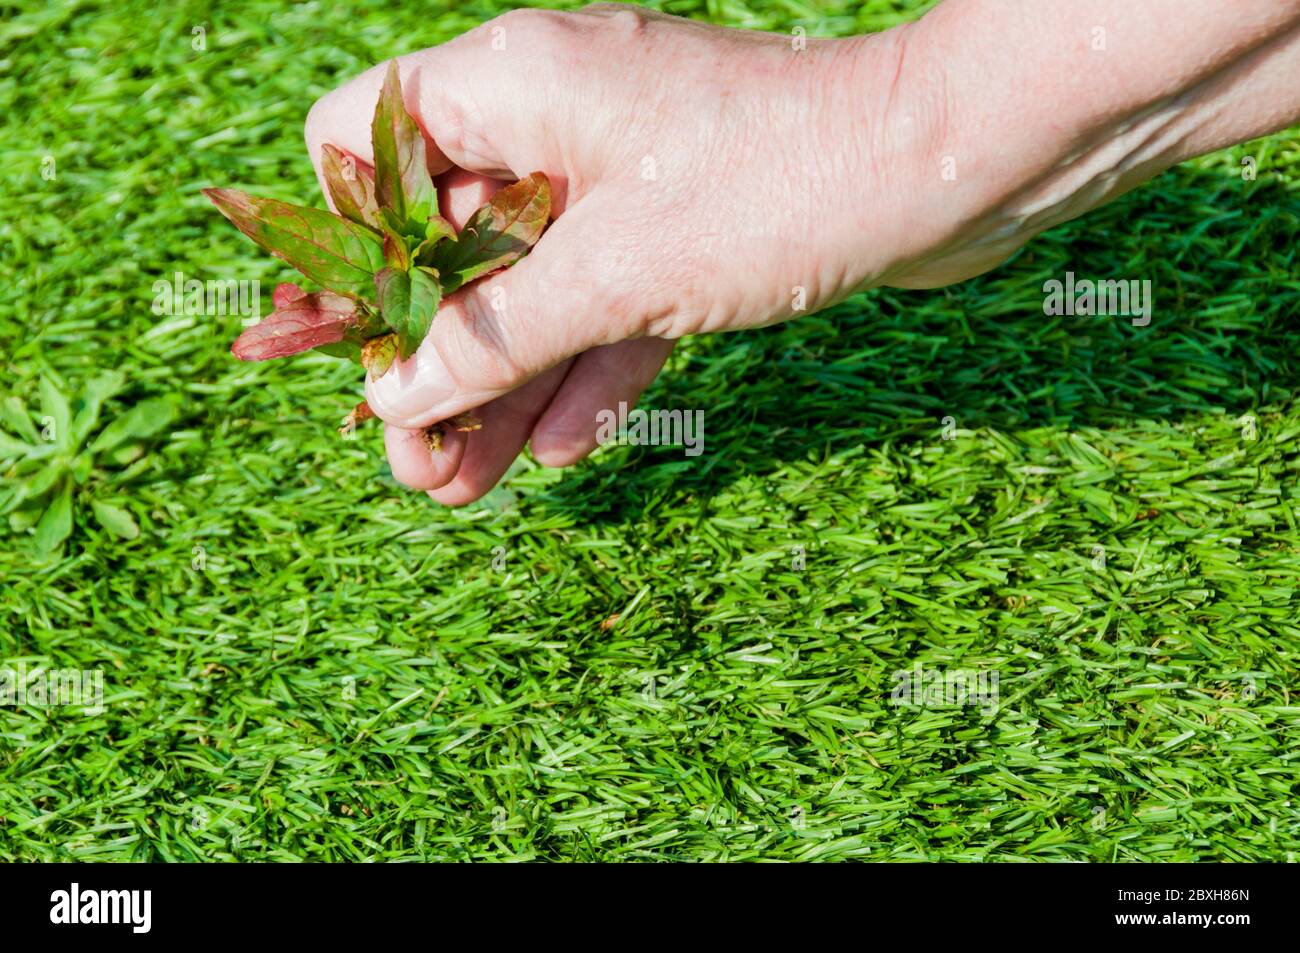 Woman pulling surface weeds from an artificial grass or astroturf lawn - needs regular weeding to remove airborne self-sown weeds from surface. Stock Photo